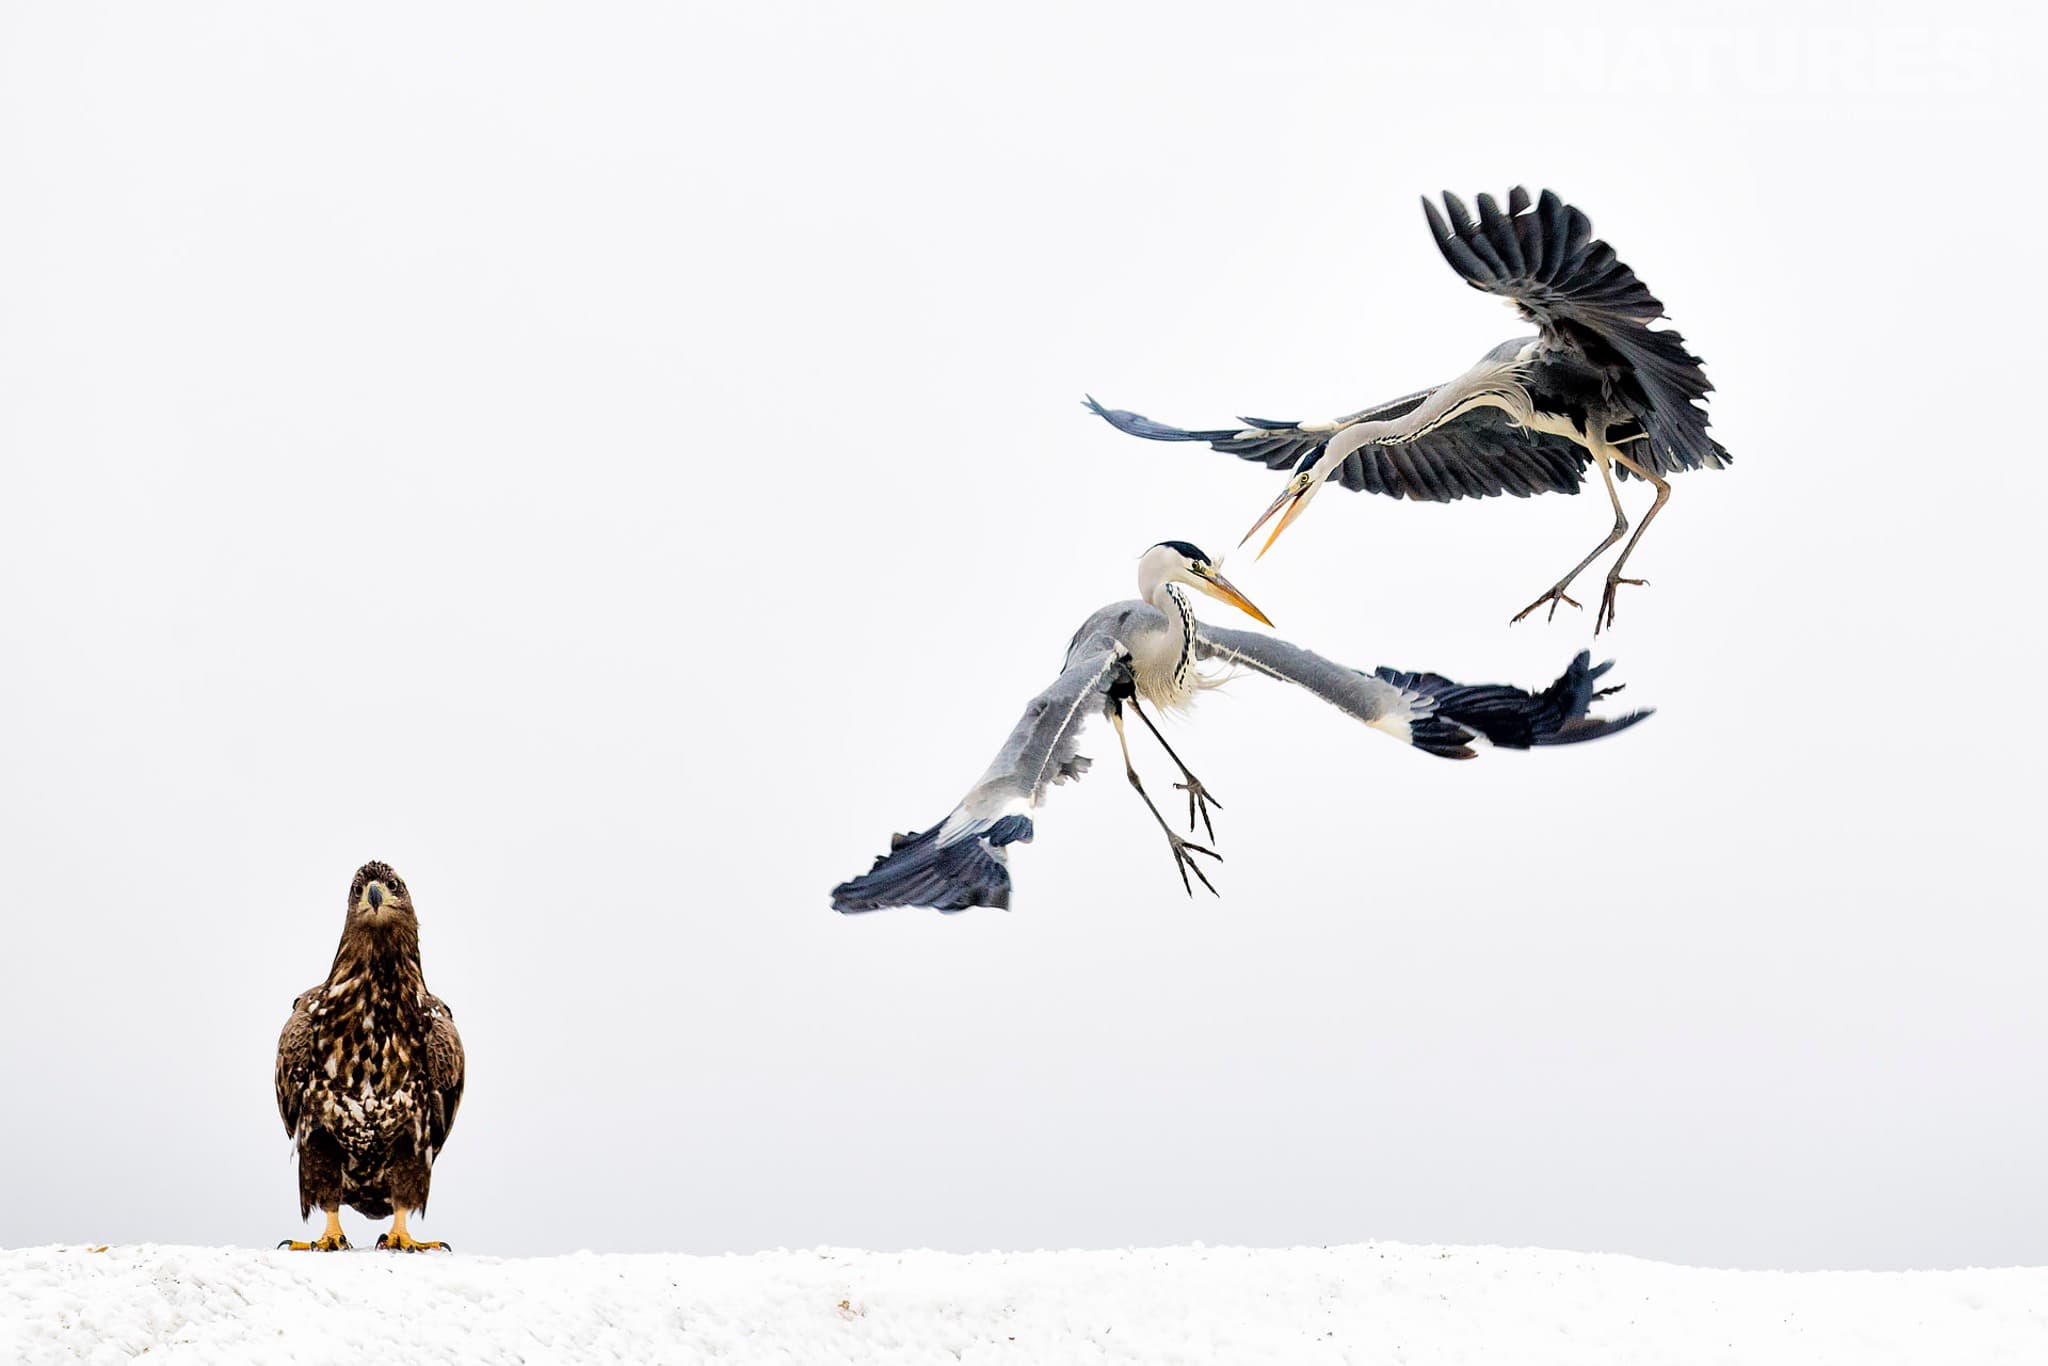 Feeding frenzy at Bence Mátés Photography Hides during the Hungarian Winter